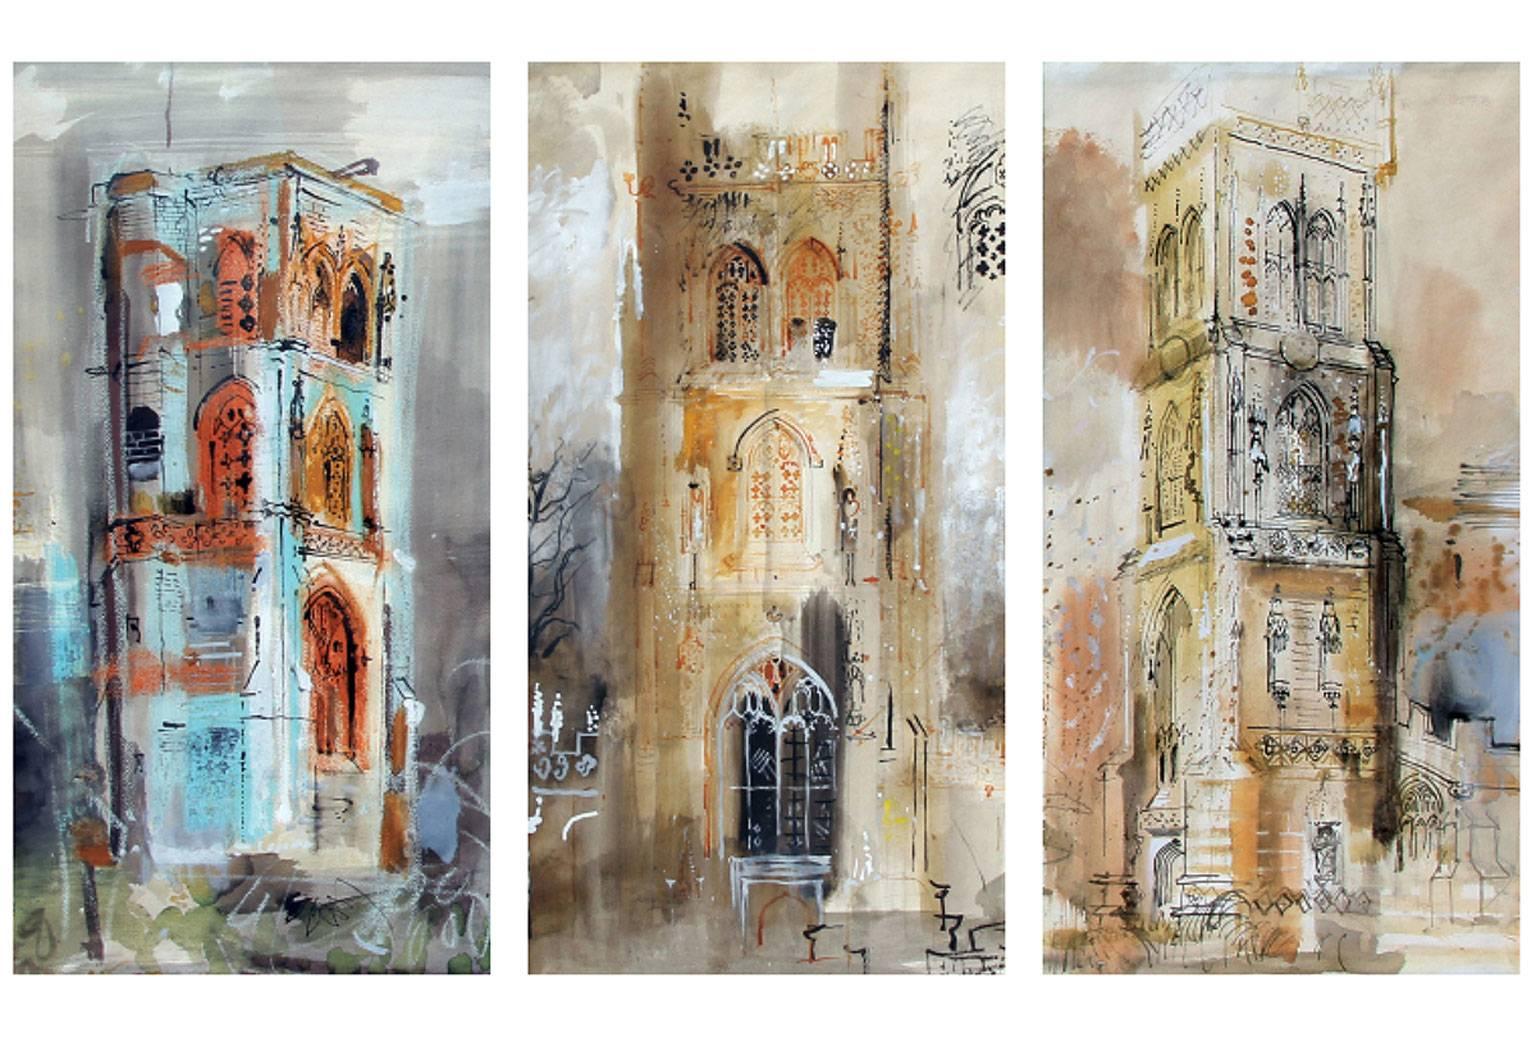 JOHN PIPER
British, 1903–1992

Three Somerset Towers

Signed, titled and dated on the reverse Three Somerset Towers/ John Piper/ 1954 on the backboard; also inscribed with the names of the churches (viewed left to right) Ruishton, Ile Abbotts,